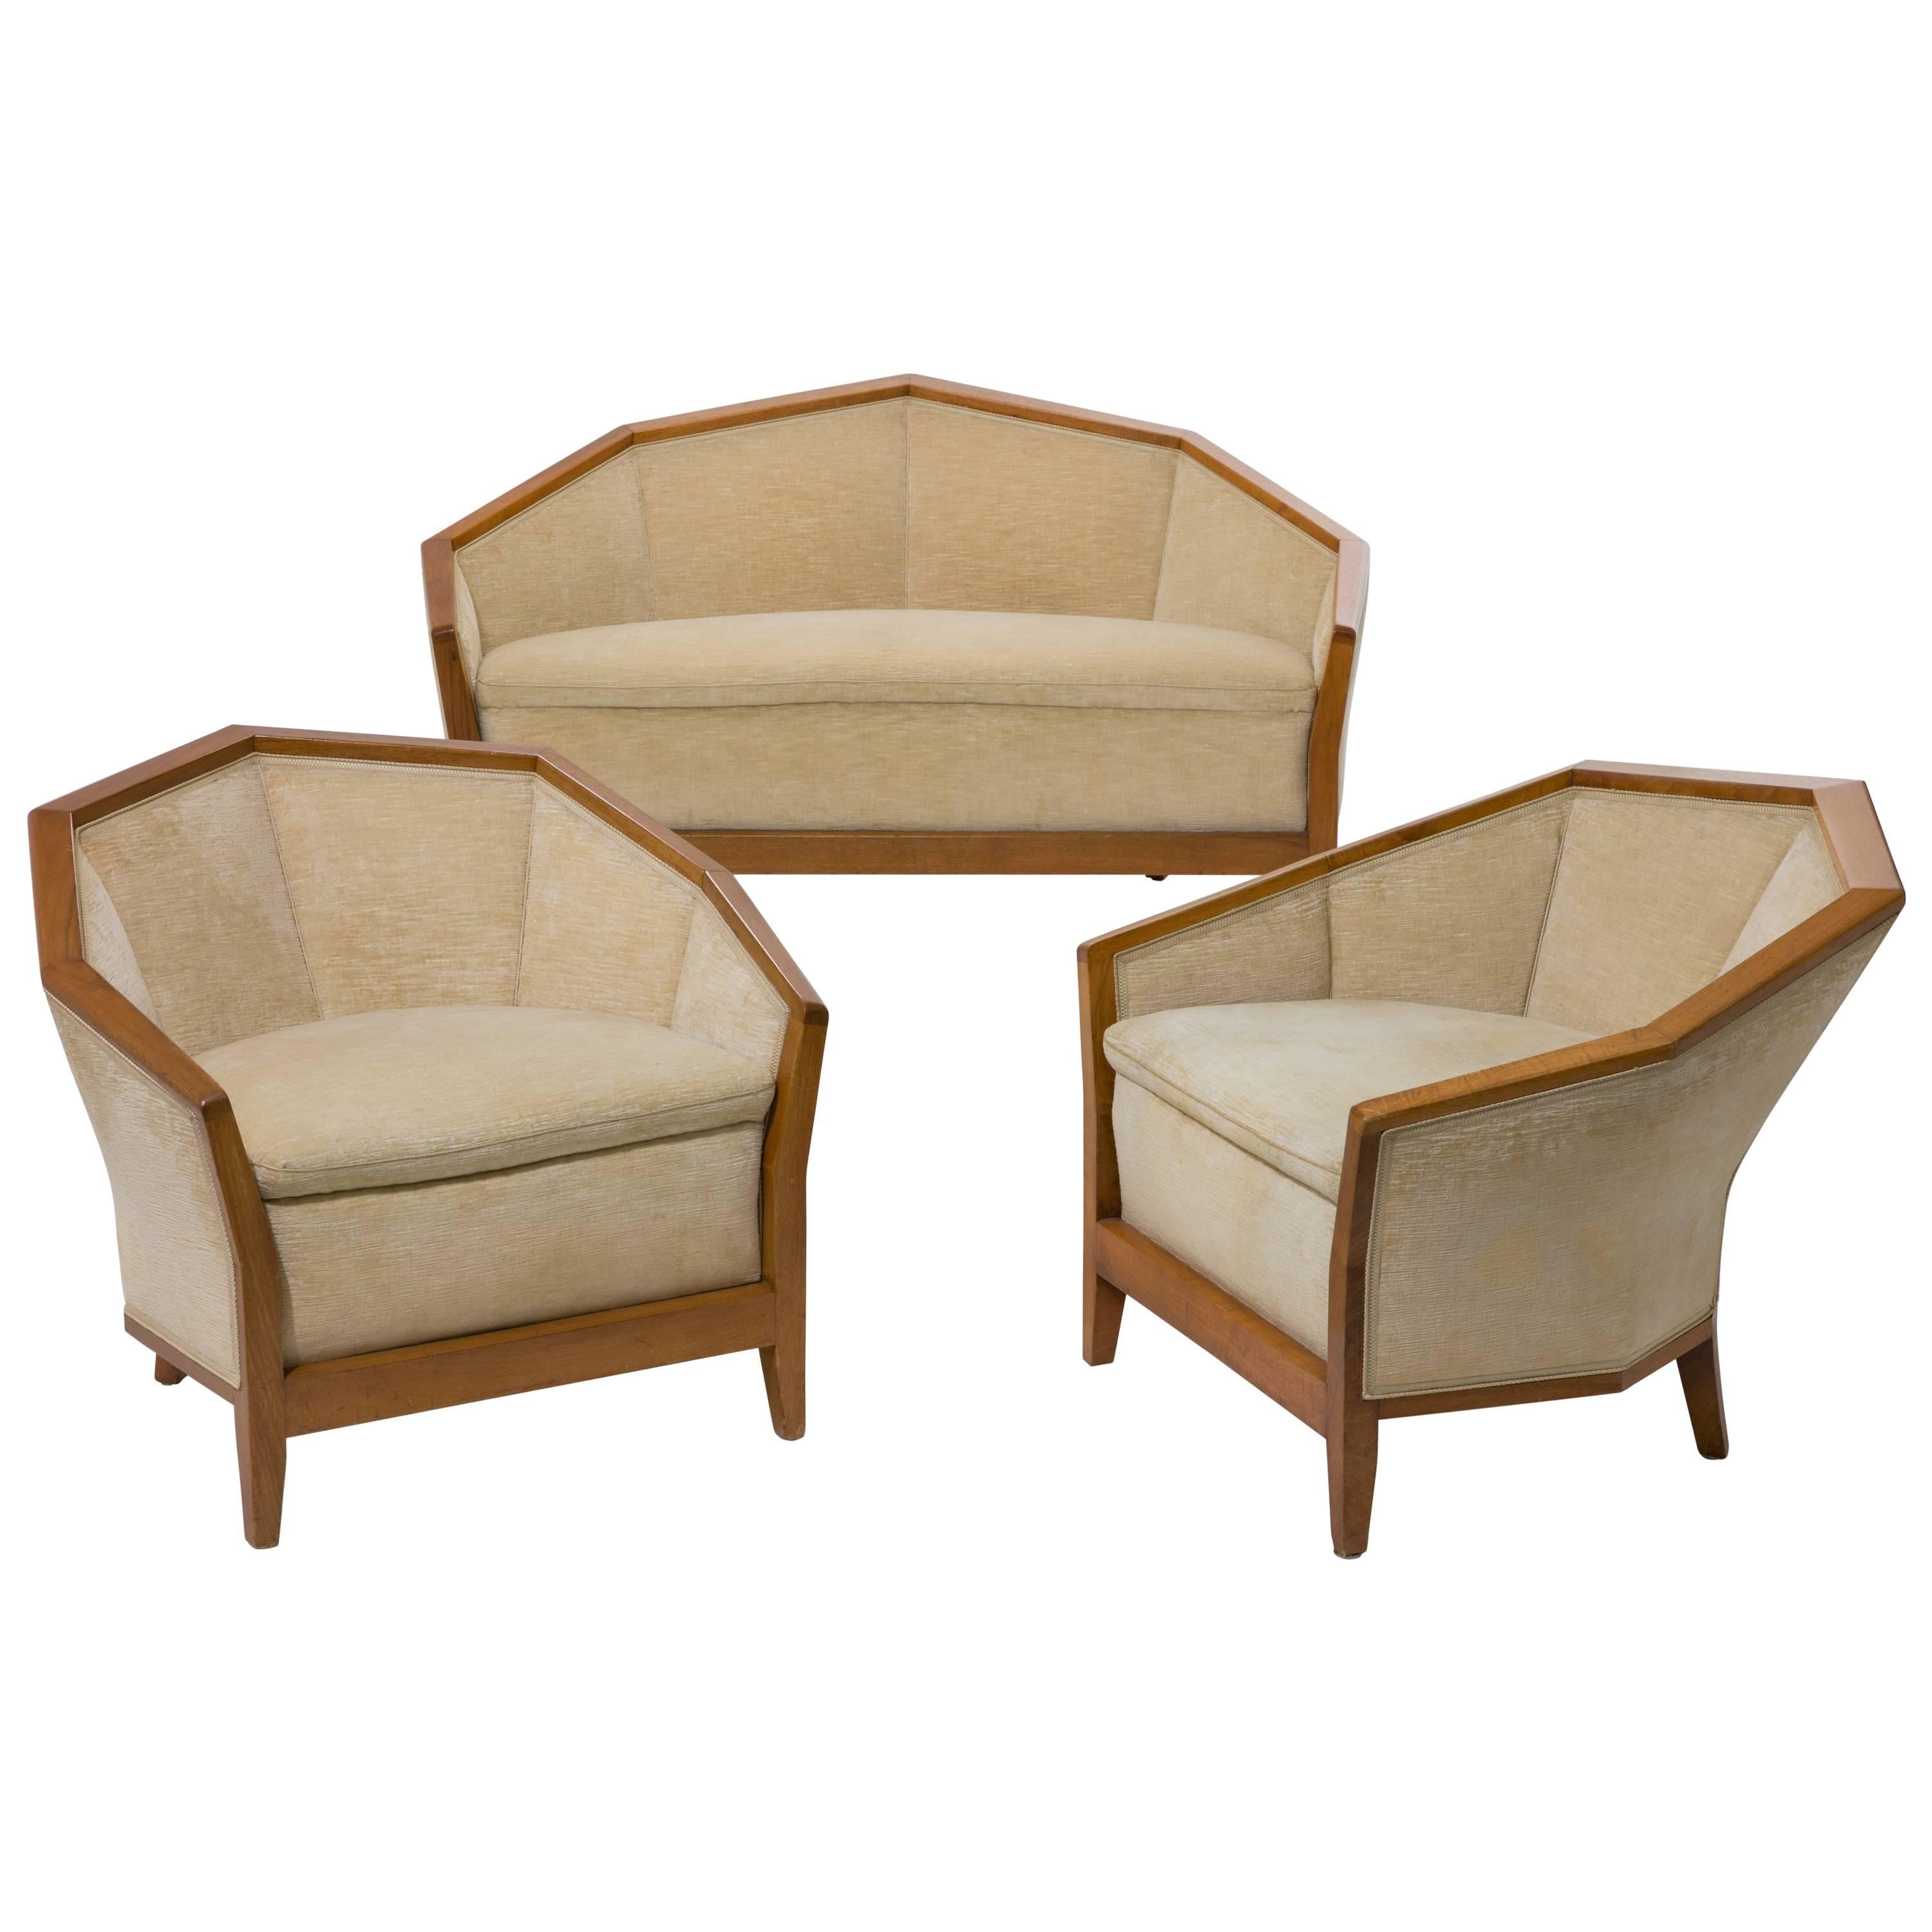 Pierre Chareau '1883-1950, ' Settee and Two Armchairs in Walnut, Early 1920s For Sale